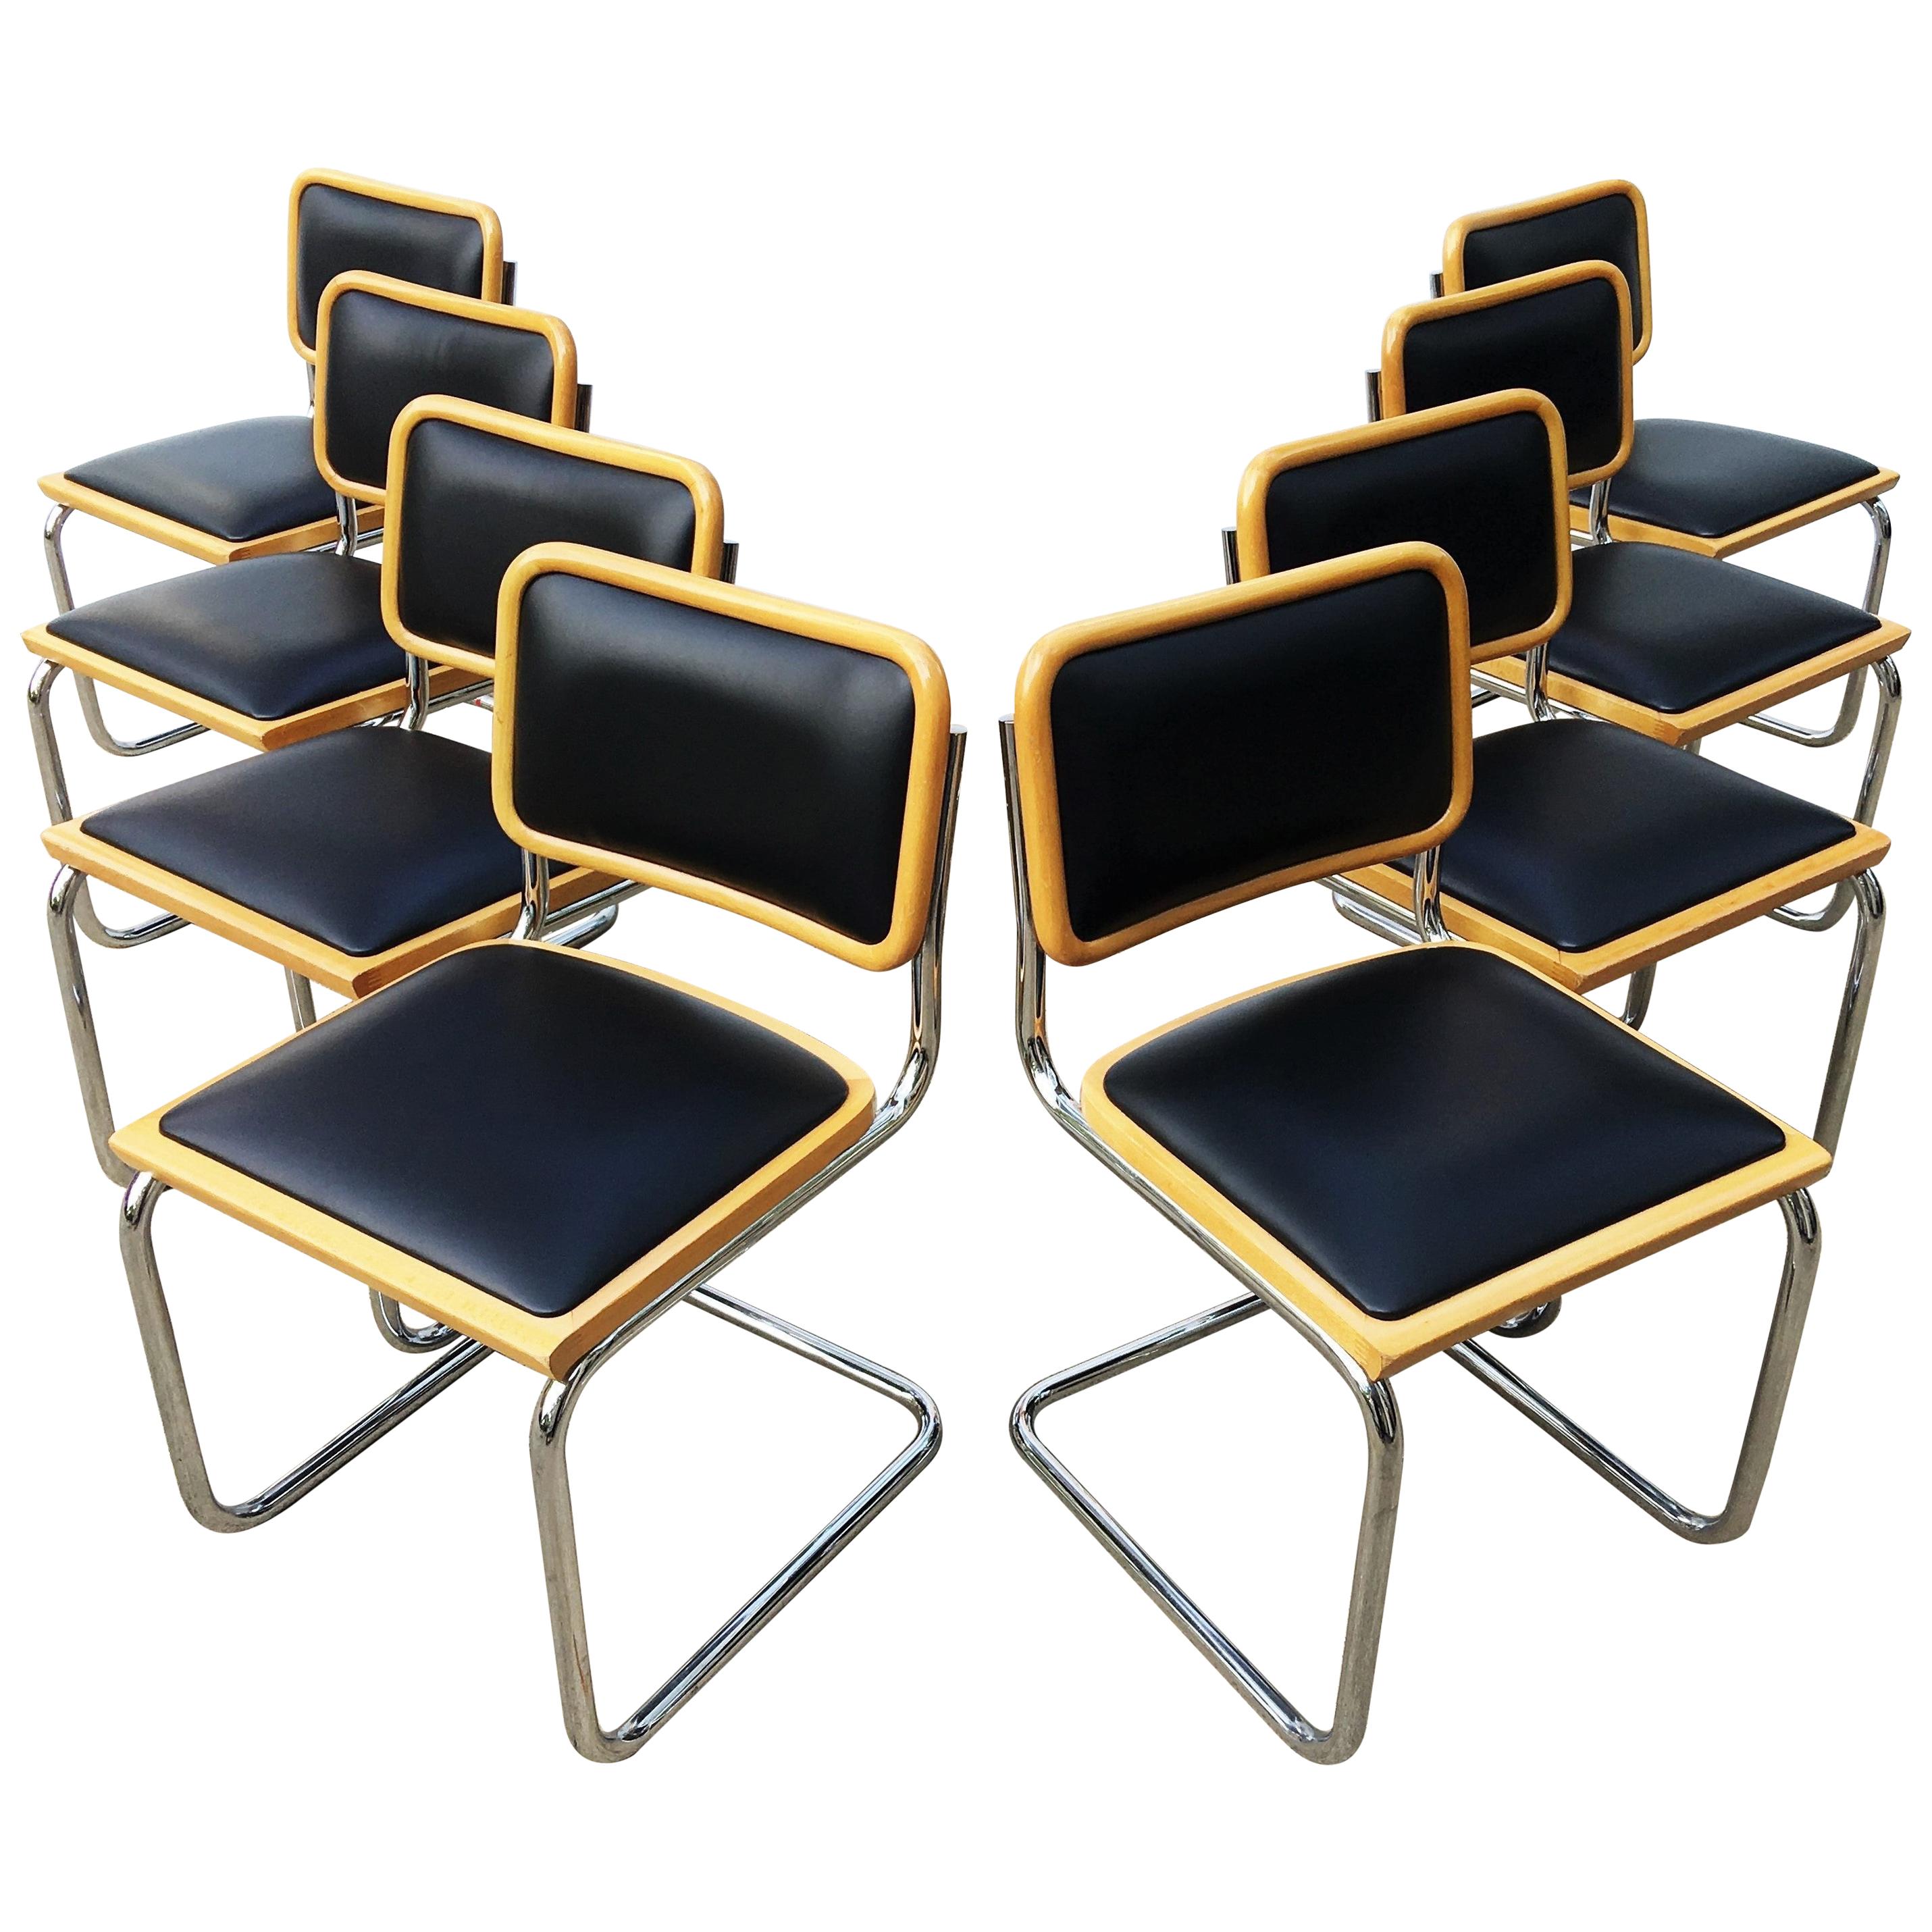 Classic Set of 8 Marcel Breuer Cesca Chairs, Made in Italy